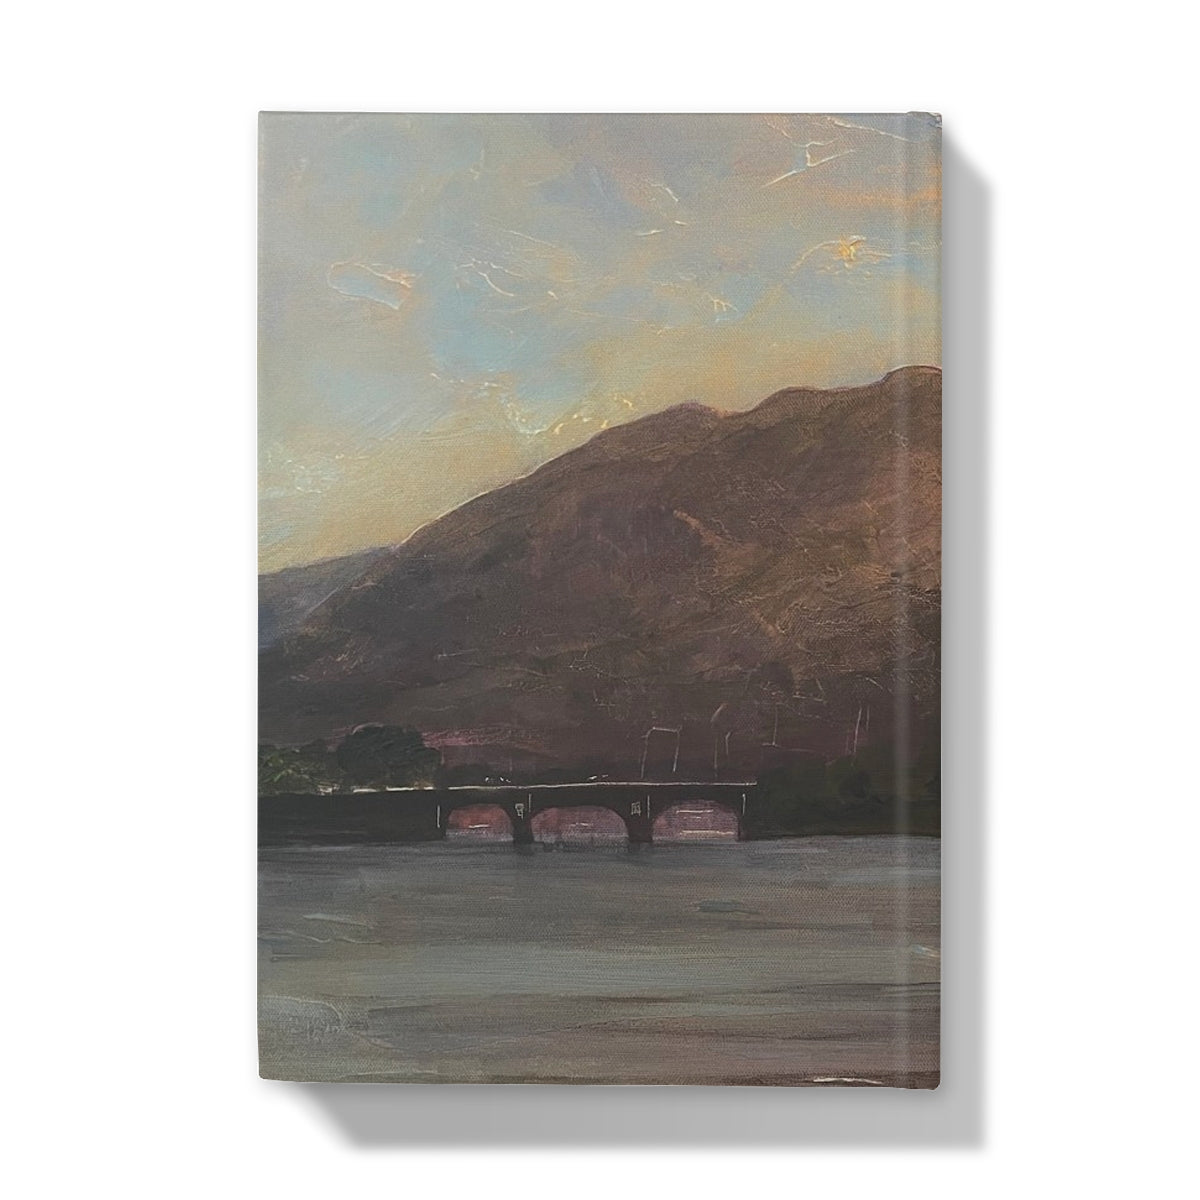 Eilean Donan Castle Art Gifts Hardback Journal-Journals & Notebooks-Historic & Iconic Scotland Art Gallery-Paintings, Prints, Homeware, Art Gifts From Scotland By Scottish Artist Kevin Hunter